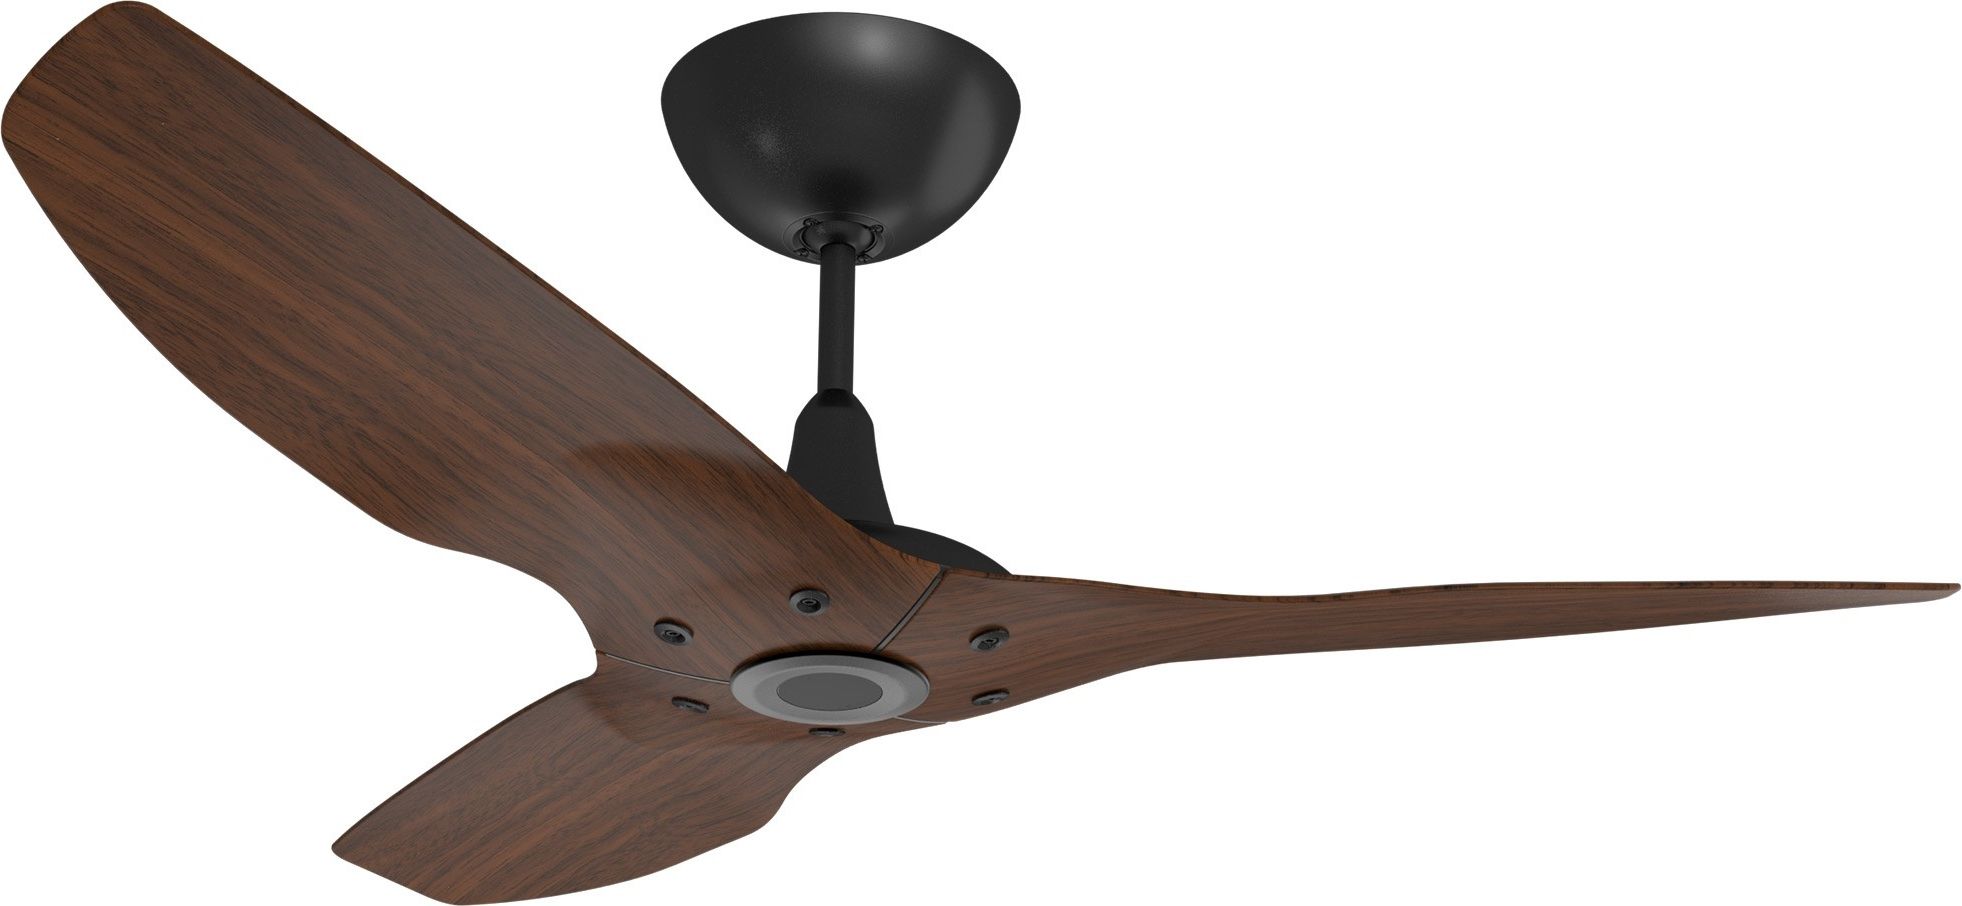 Outdoor Ceiling Fans With Cord Regarding 2019 Haiku Outdoor Ceiling Fan: 52", Cocoa Woodgrain Aluminum, Universal (View 7 of 20)